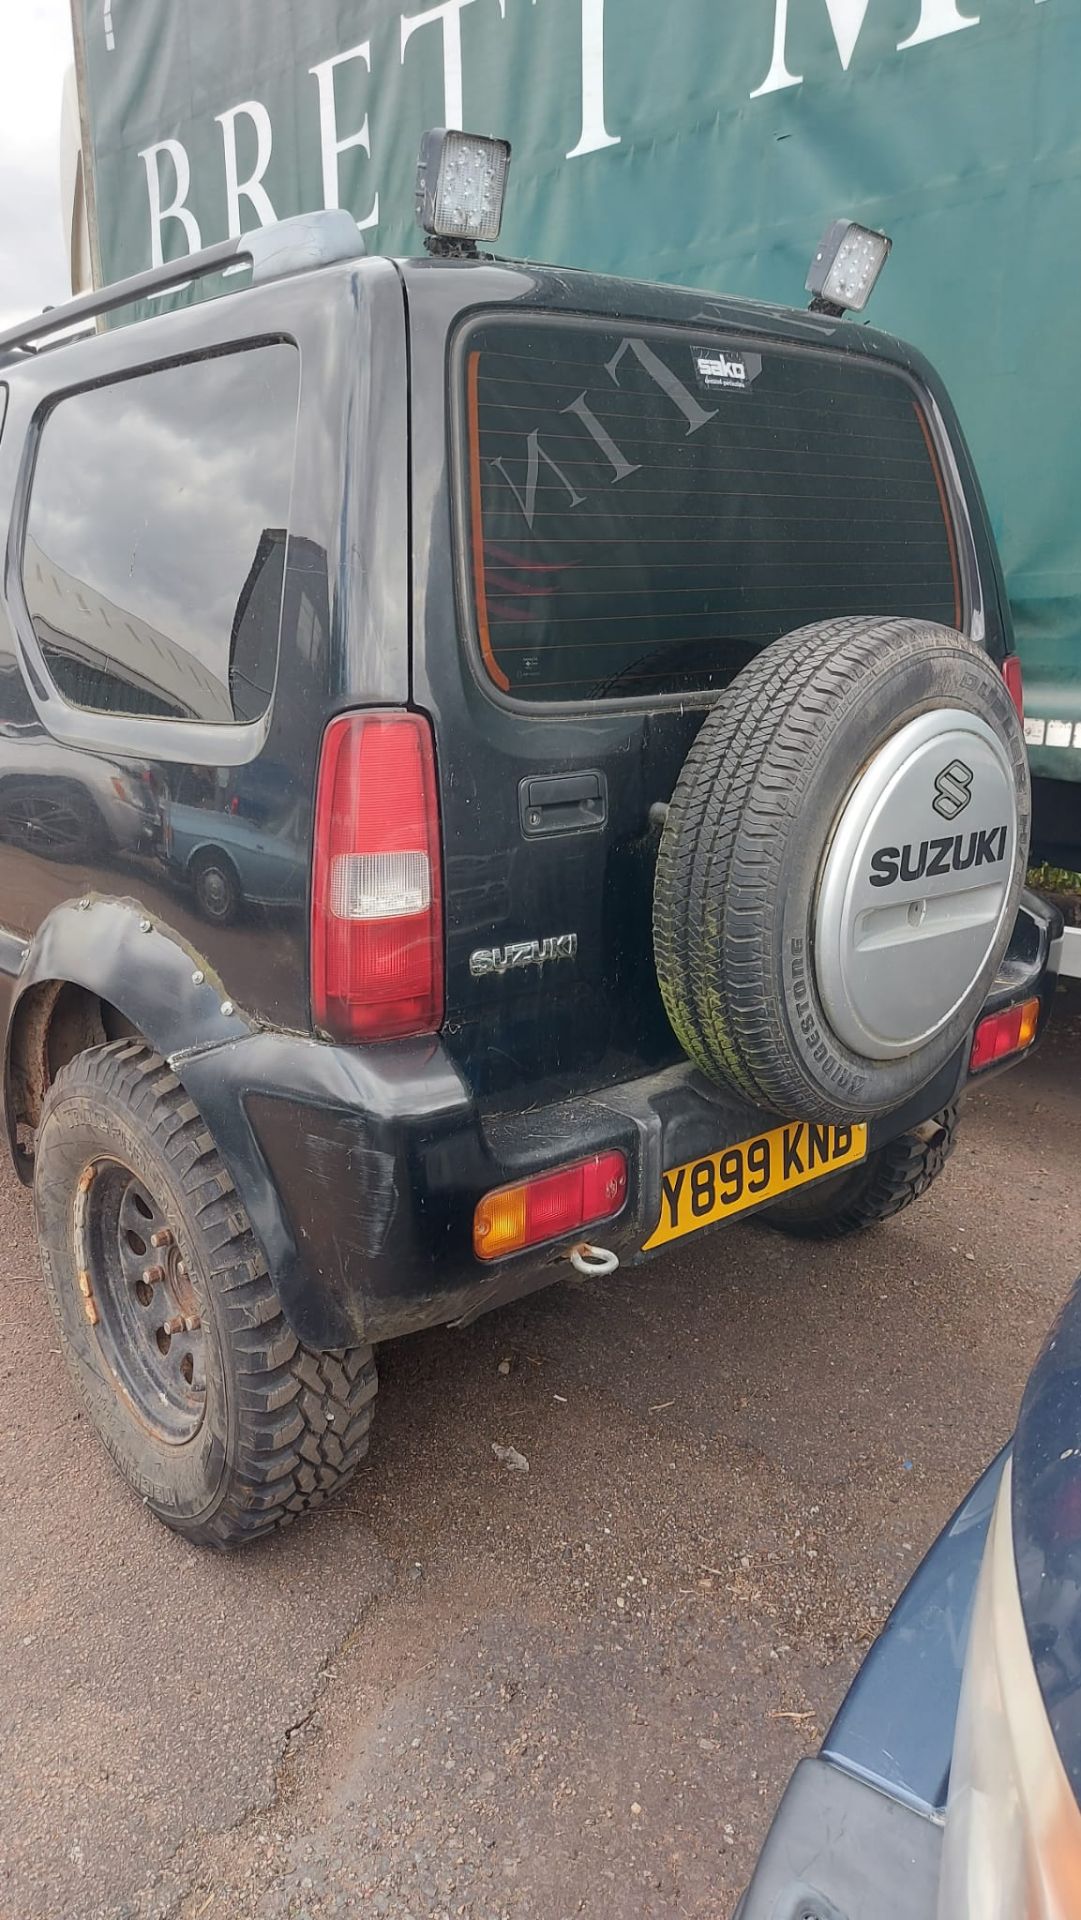 BARN FIND 2001 SUZUKI JIMNY JLX BLACK ESTATE, OFF THE ROAD FOR 3 YEARS *NO VAT* - Image 2 of 15